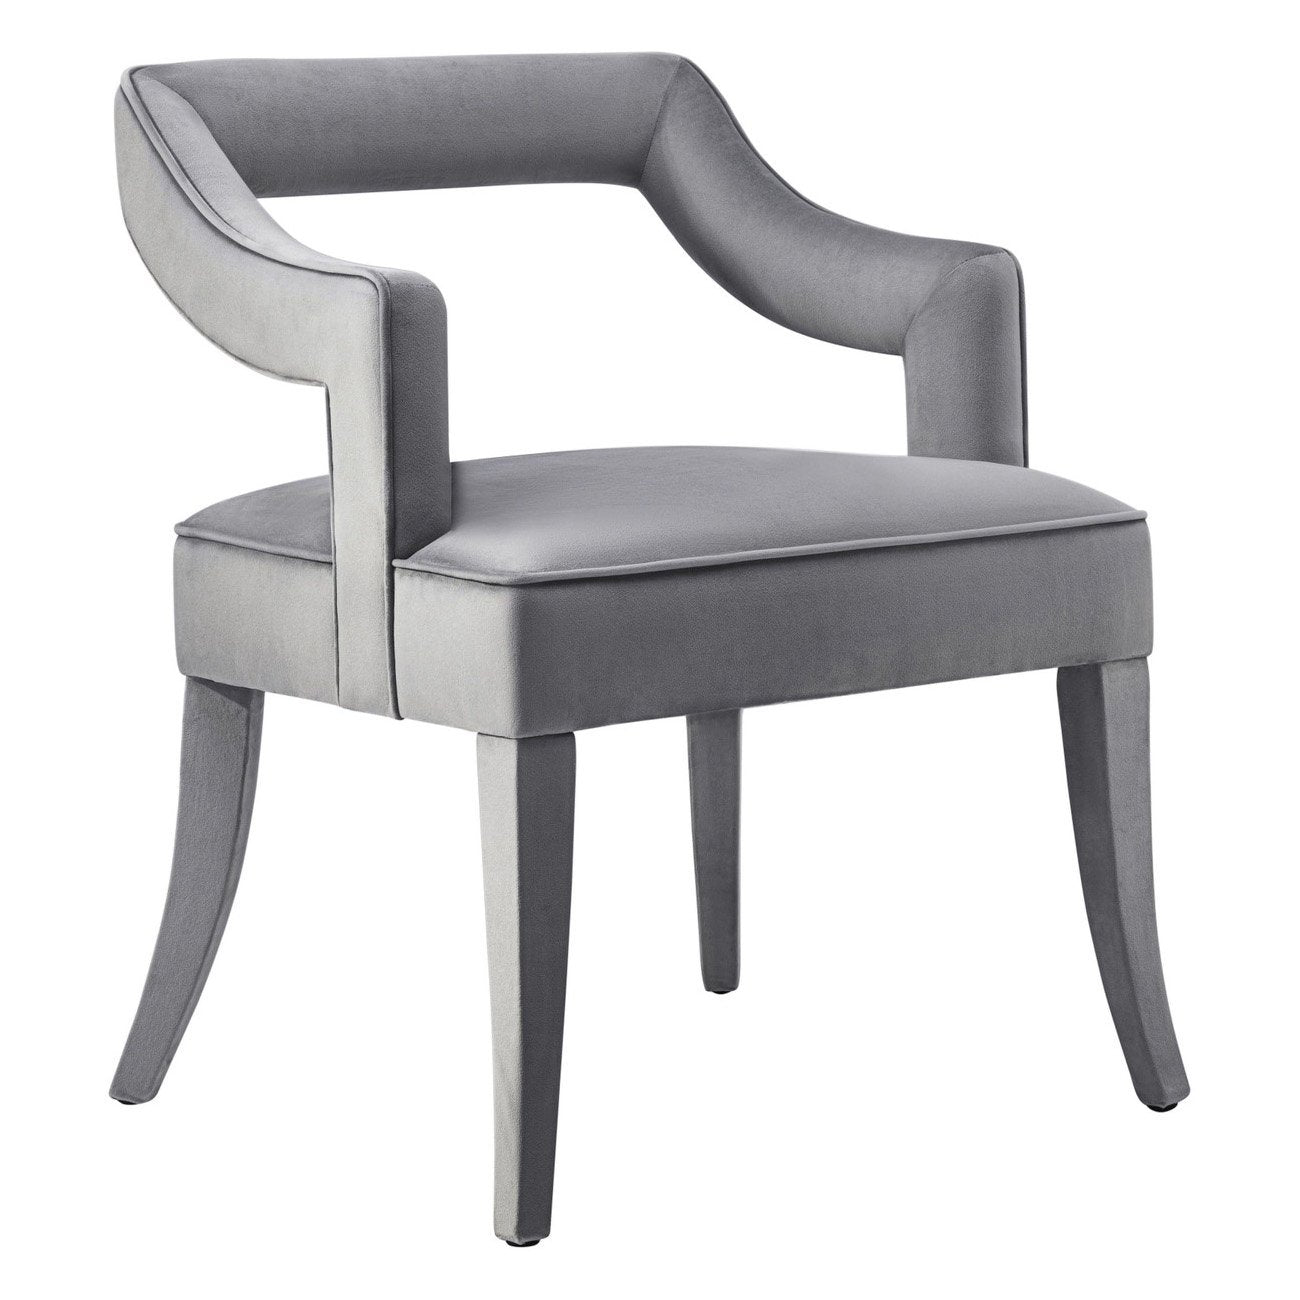 Tov-Tiffany Velvet Chair-Dining Chairs-MODTEMPO